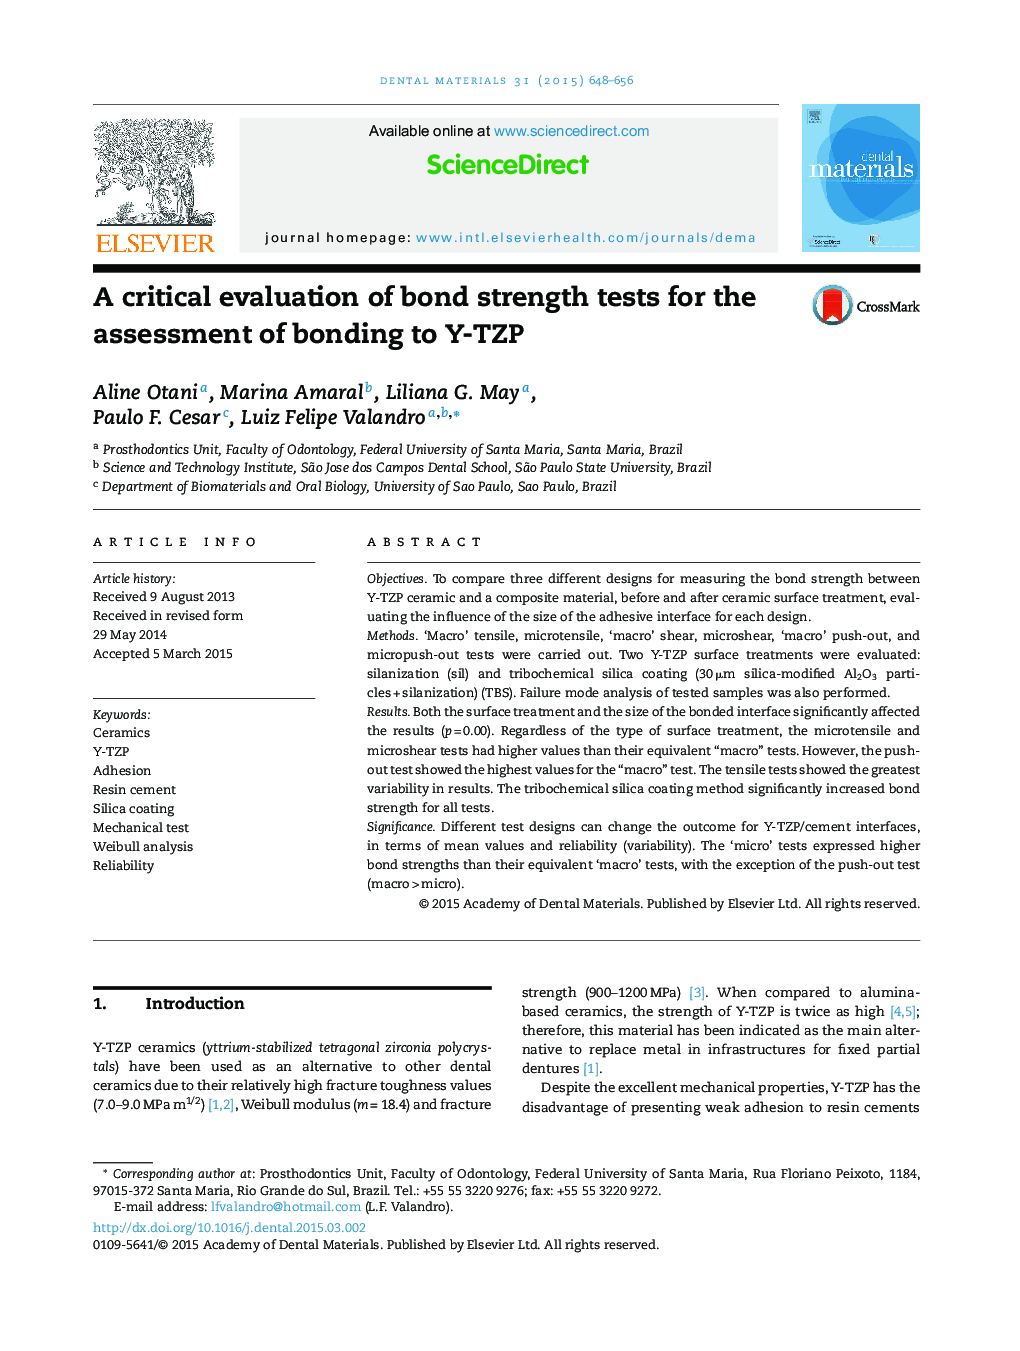 A critical evaluation of bond strength tests for the assessment of bonding to Y-TZP